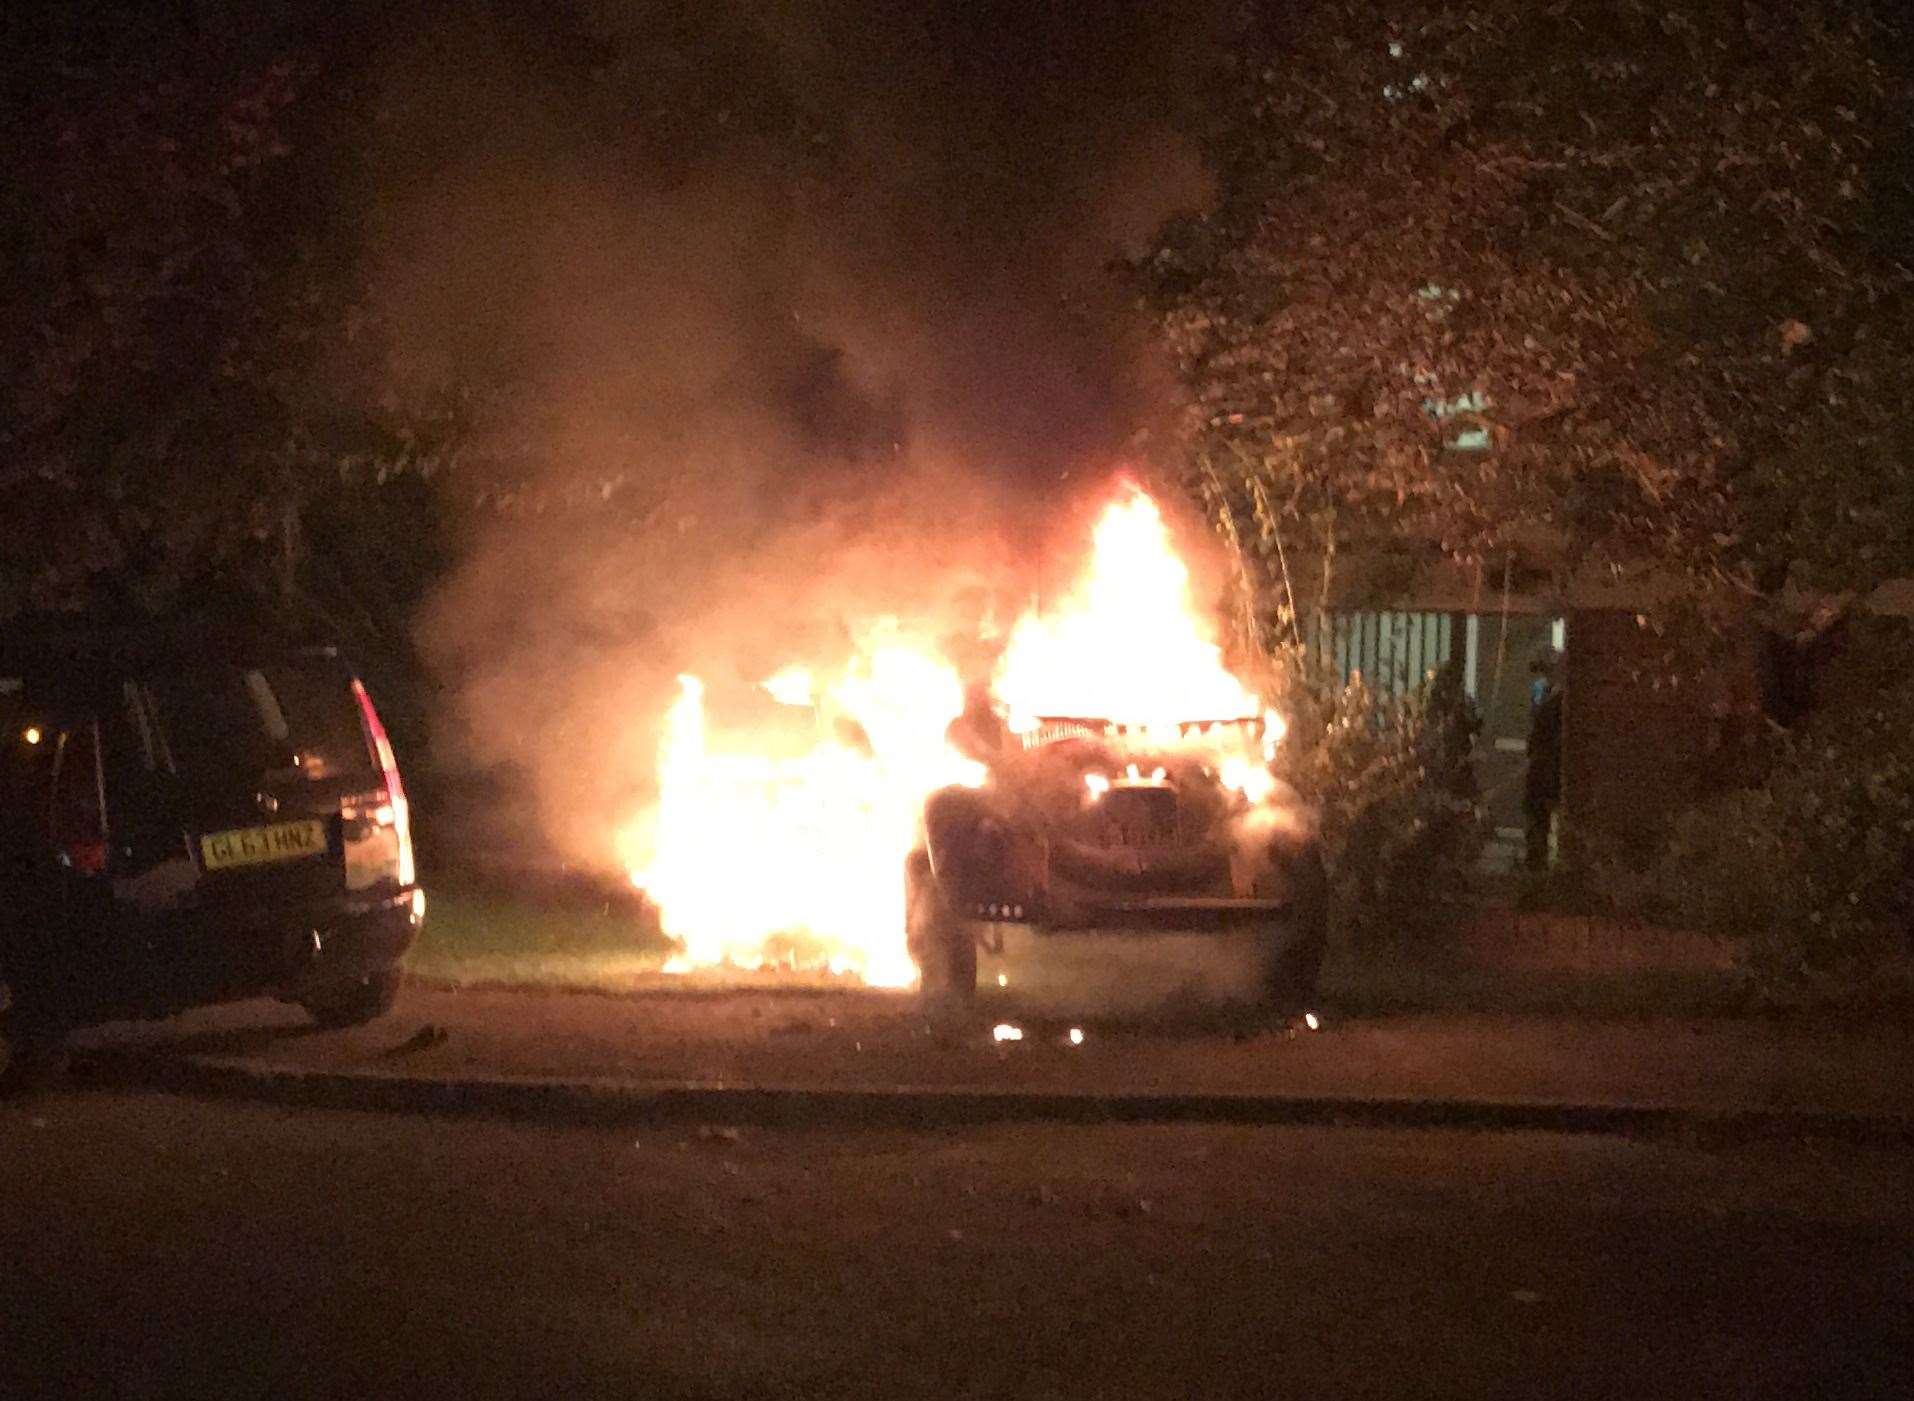 The car was set alight in Fernhill Road, Barming